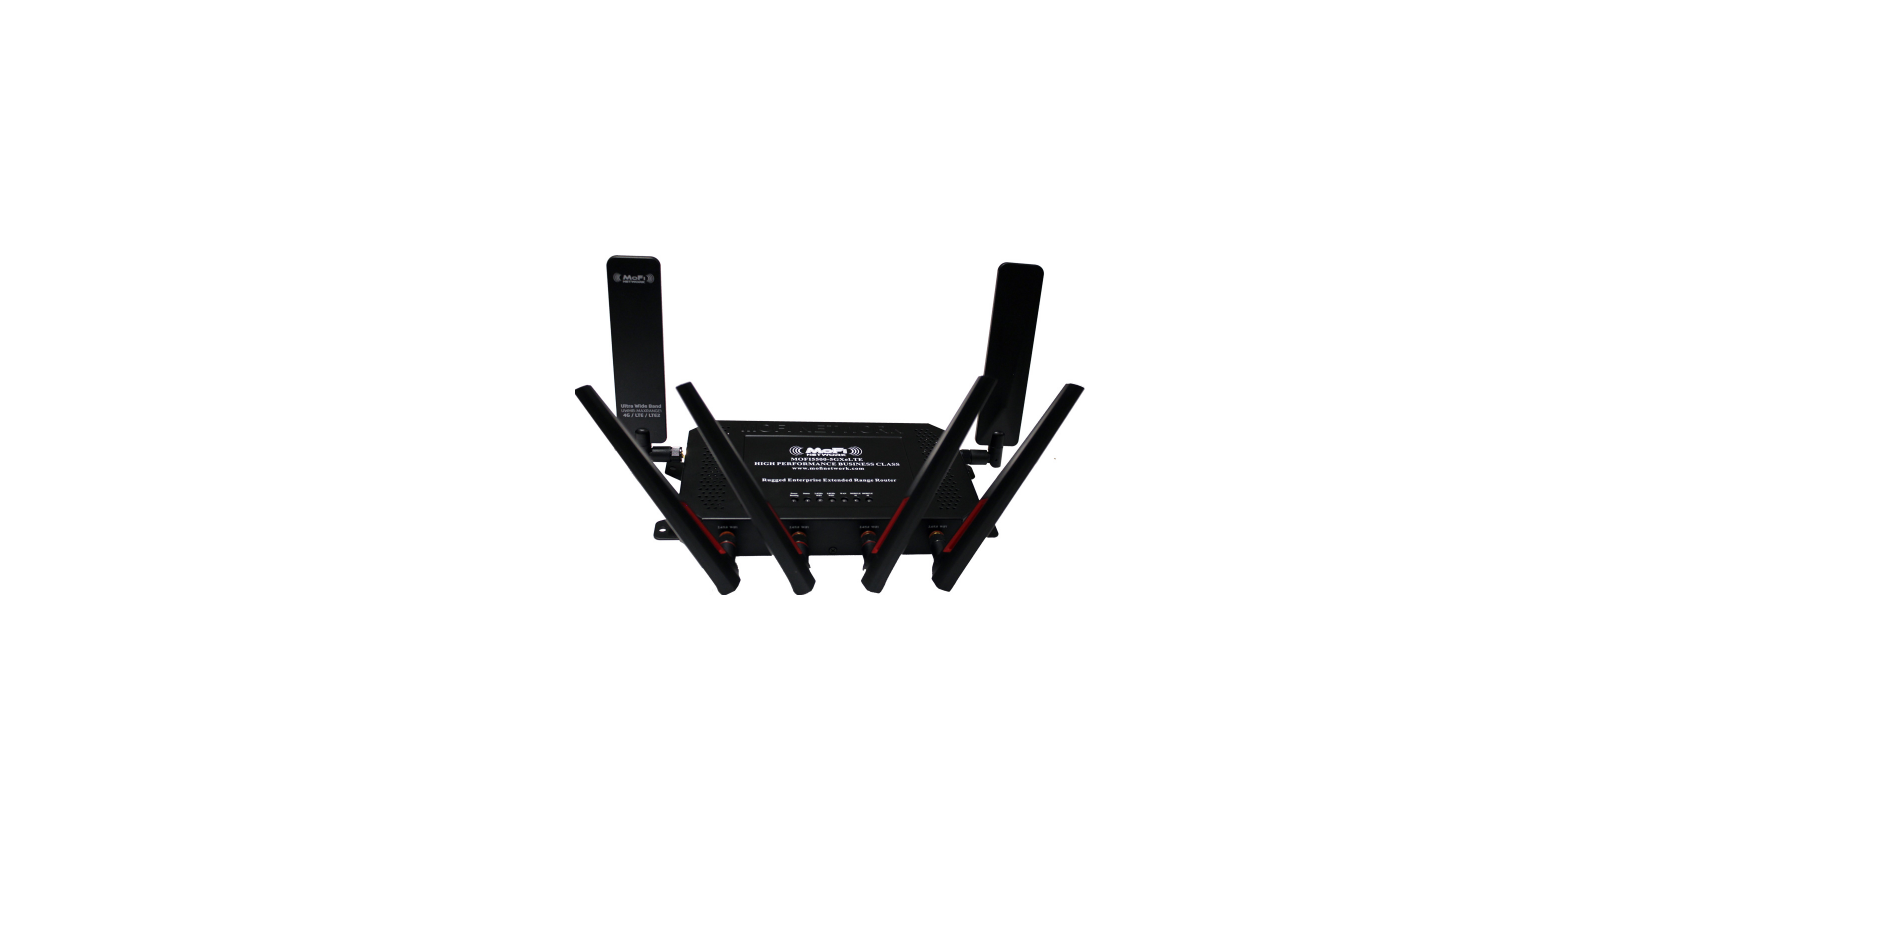 Advanced High Performance Router